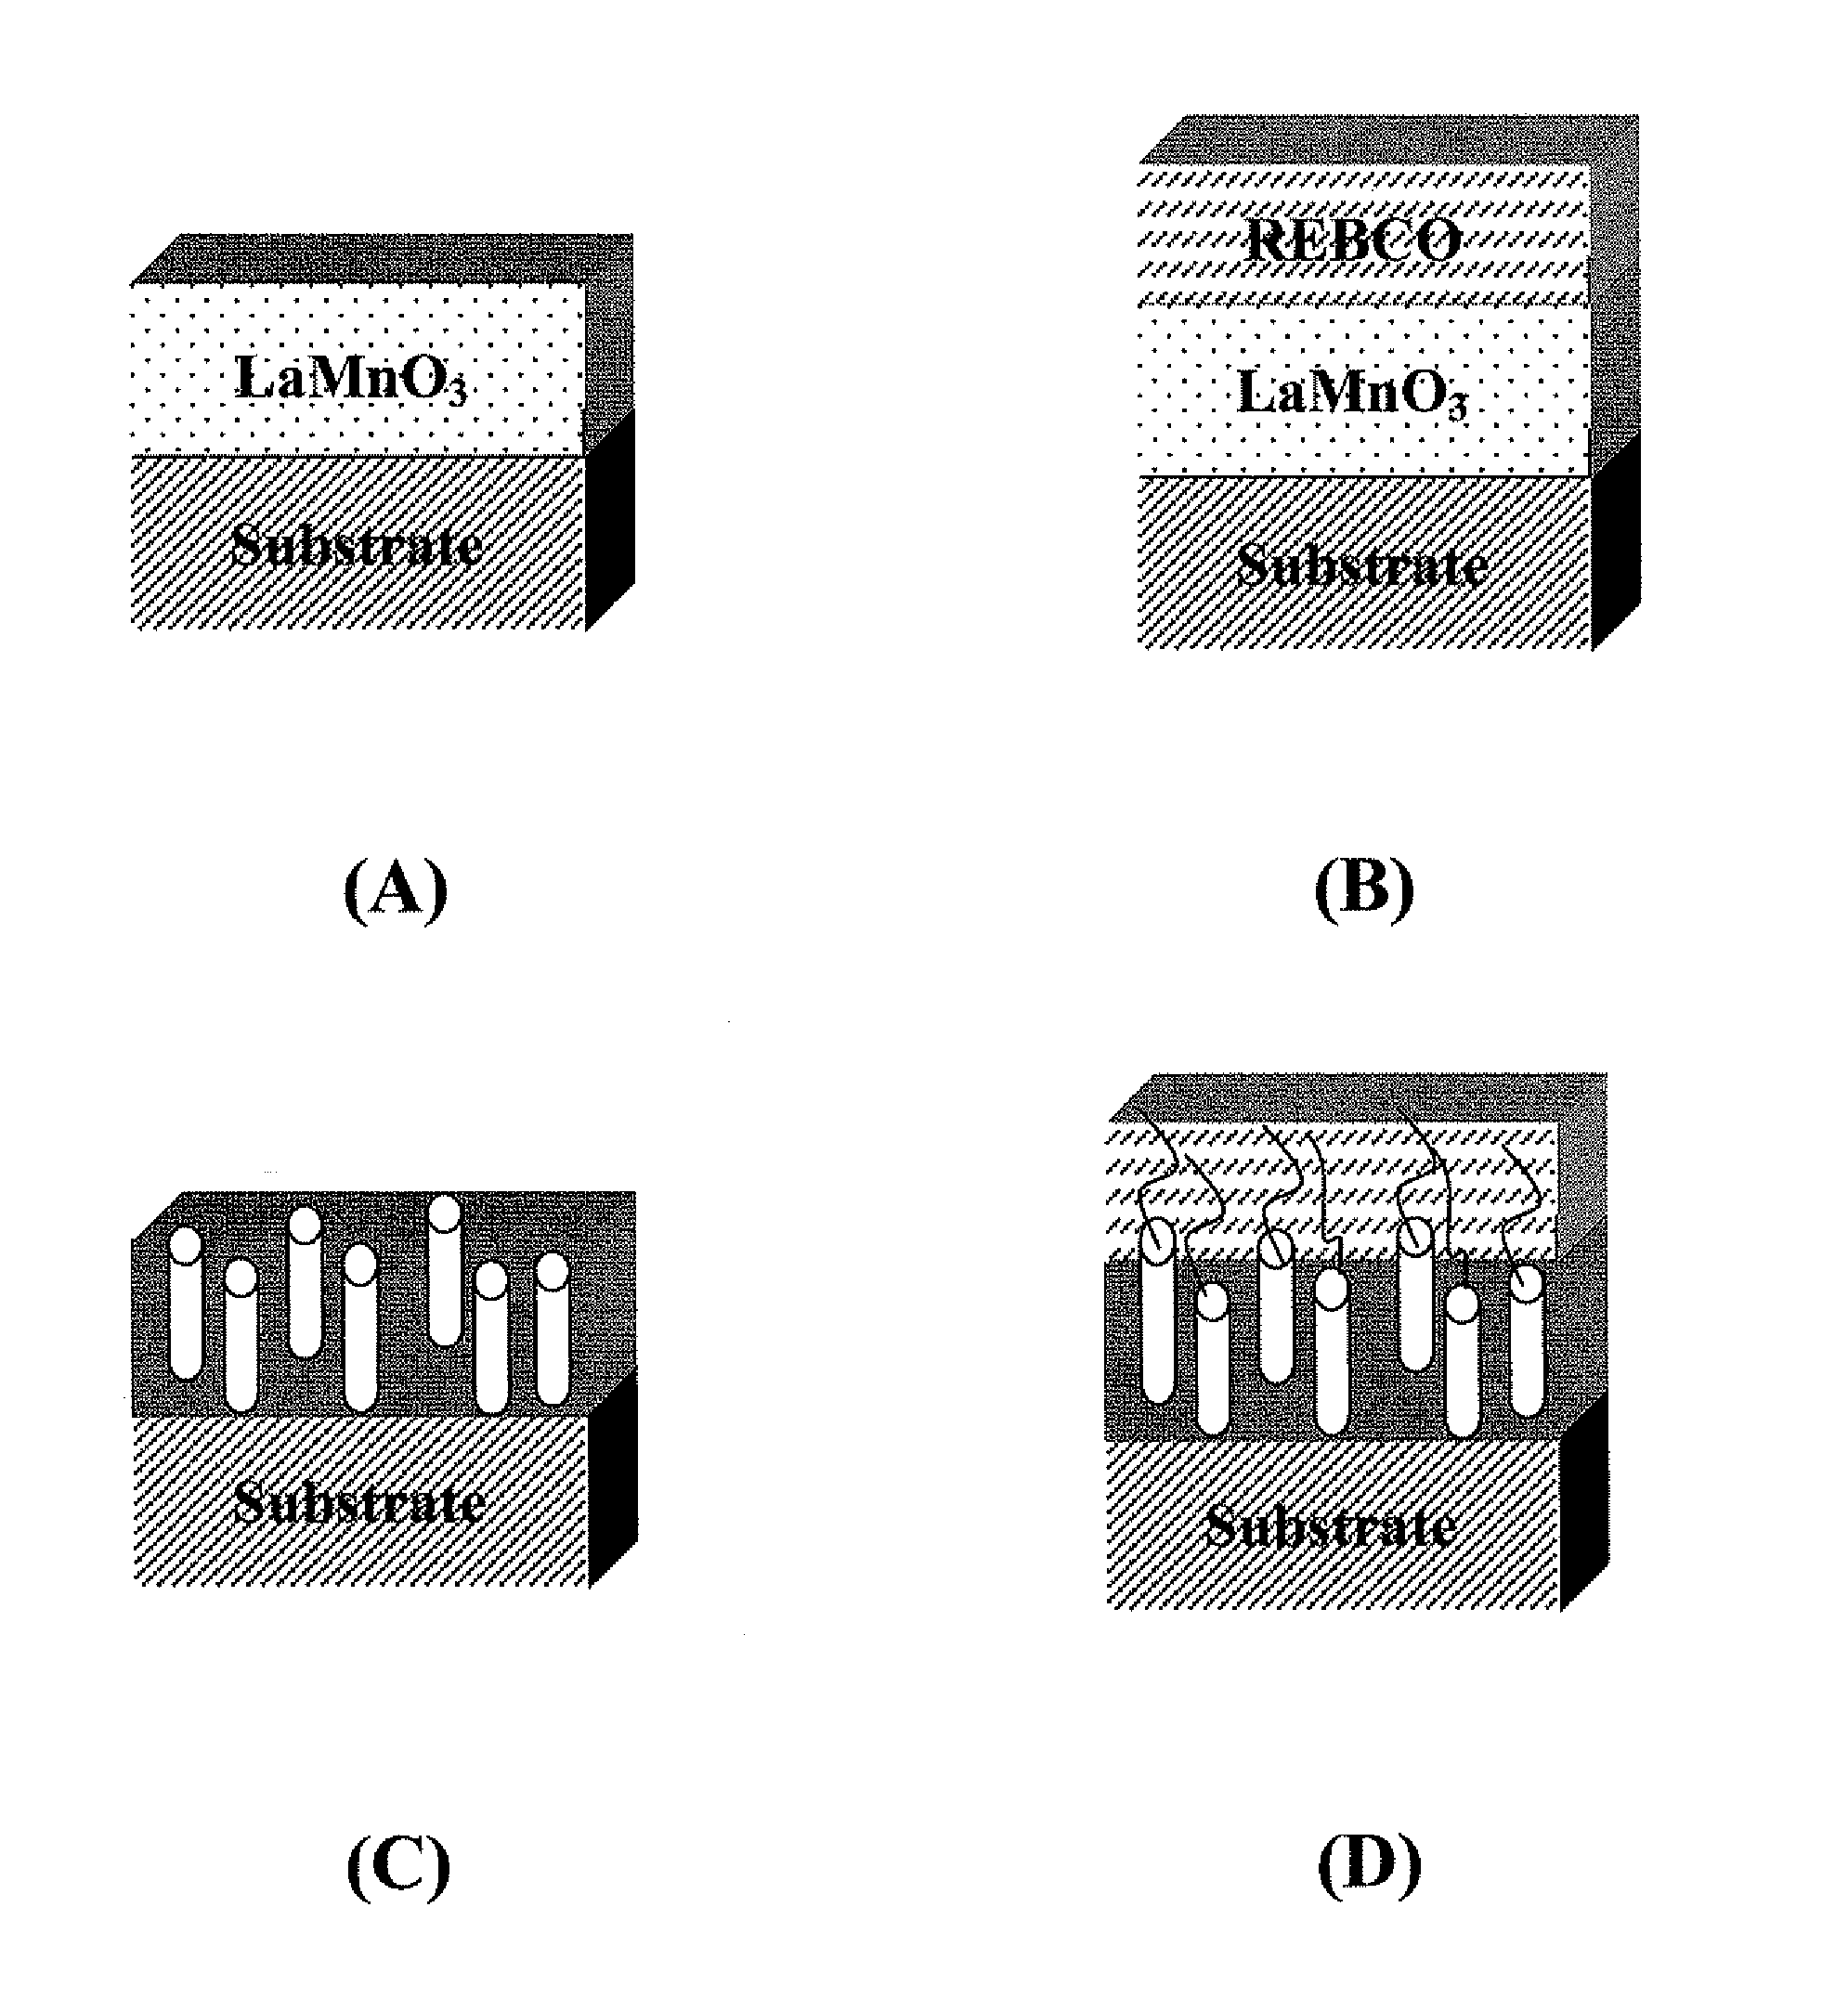 Method for producing microstructured templates and their use in providing pinning enhancements in superconducting films deposited thereon